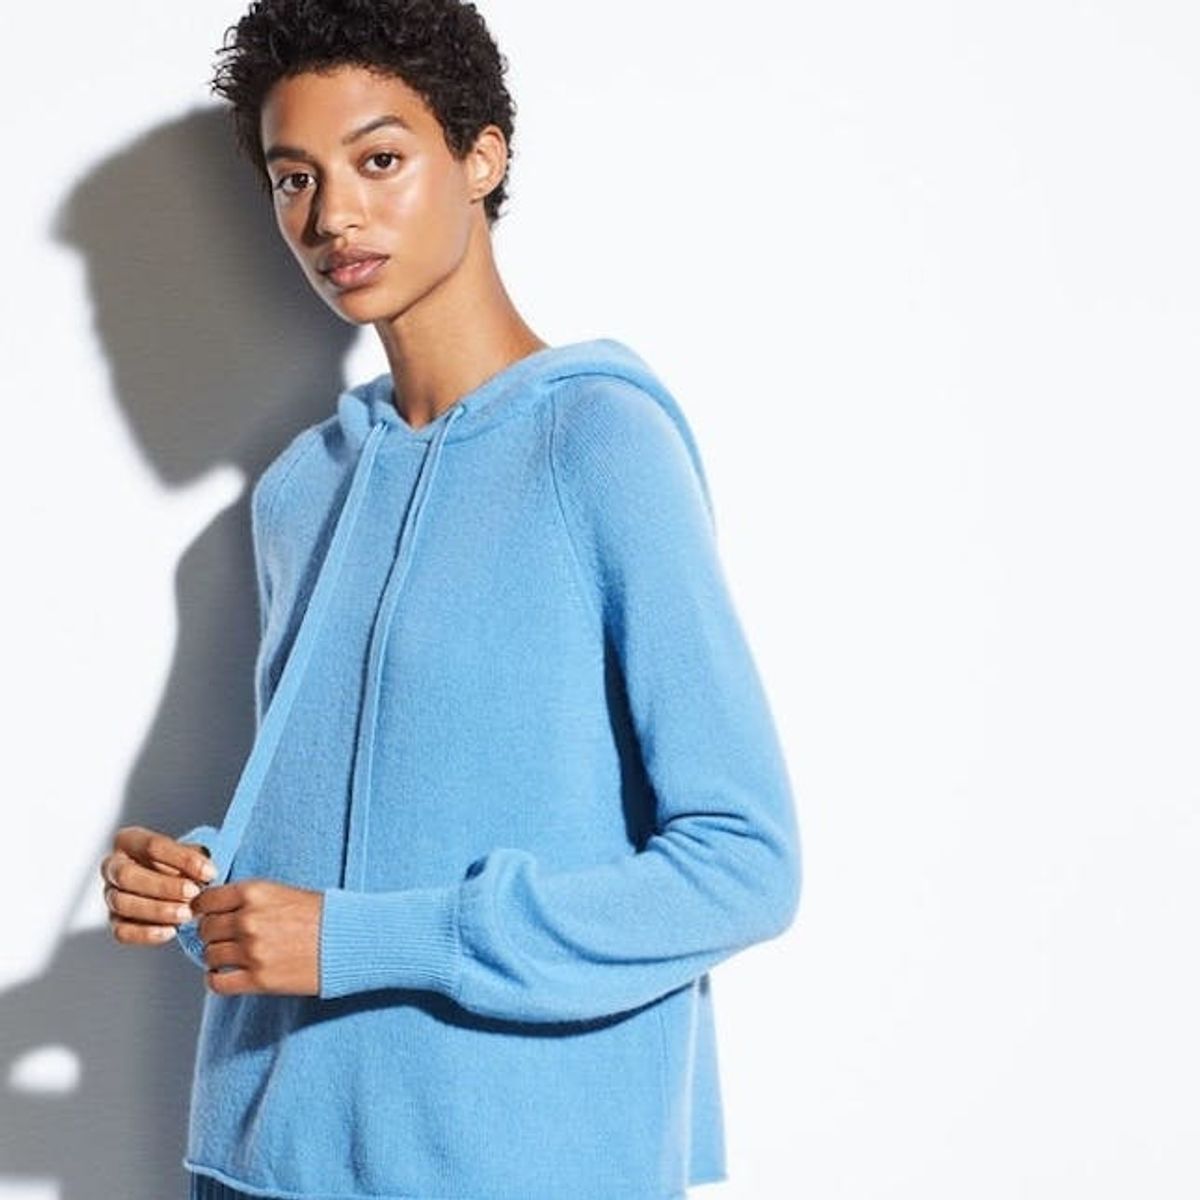 Warm-Weather Knitwear That Proves Summer Cashmere Is a Thing